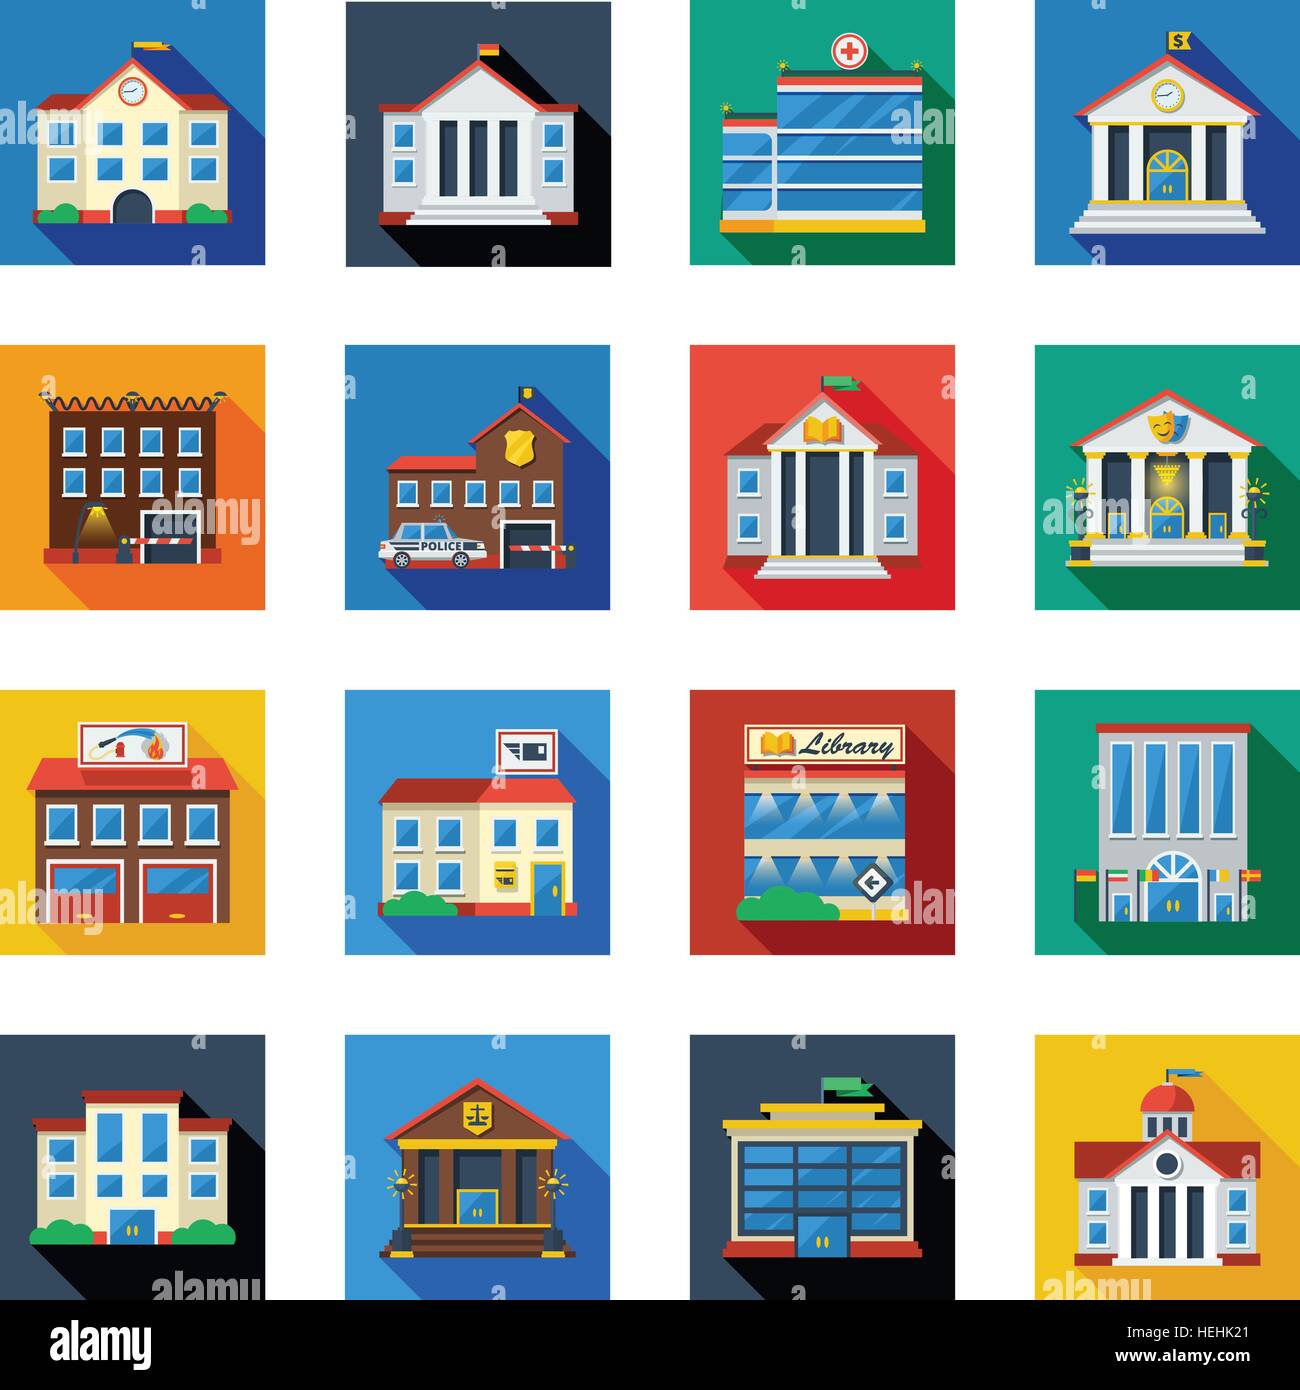 Government Buildings Icons In Colorful Squares. Government buildings flat icons set in colorful isolated squares with bank tax Stock Vector